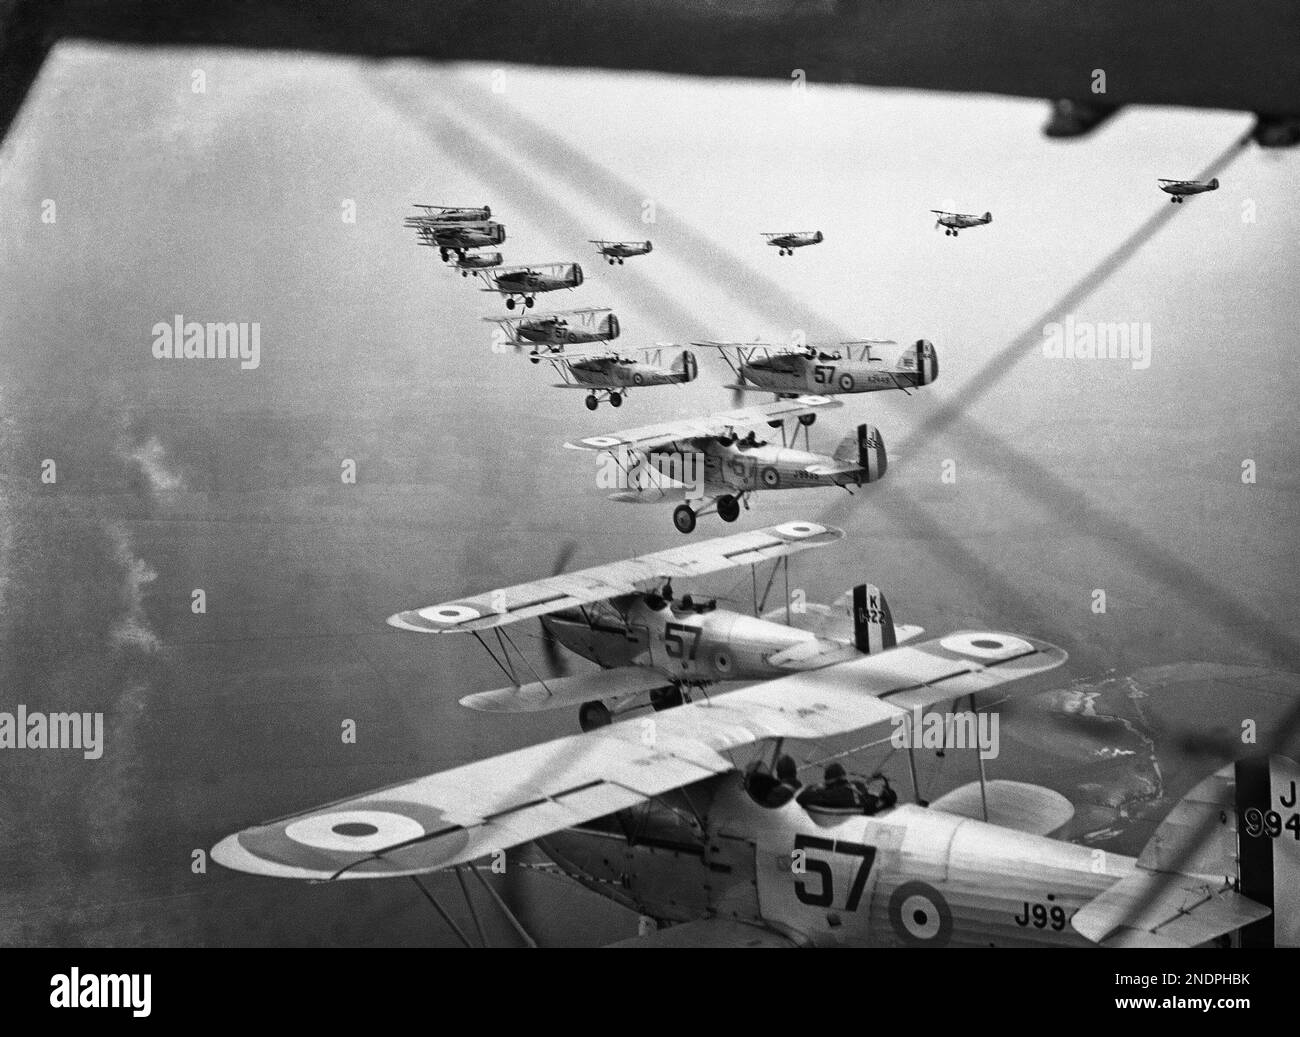 Royal Air Force planes in a formation flight on Dec. 18, 1933. (AP ...